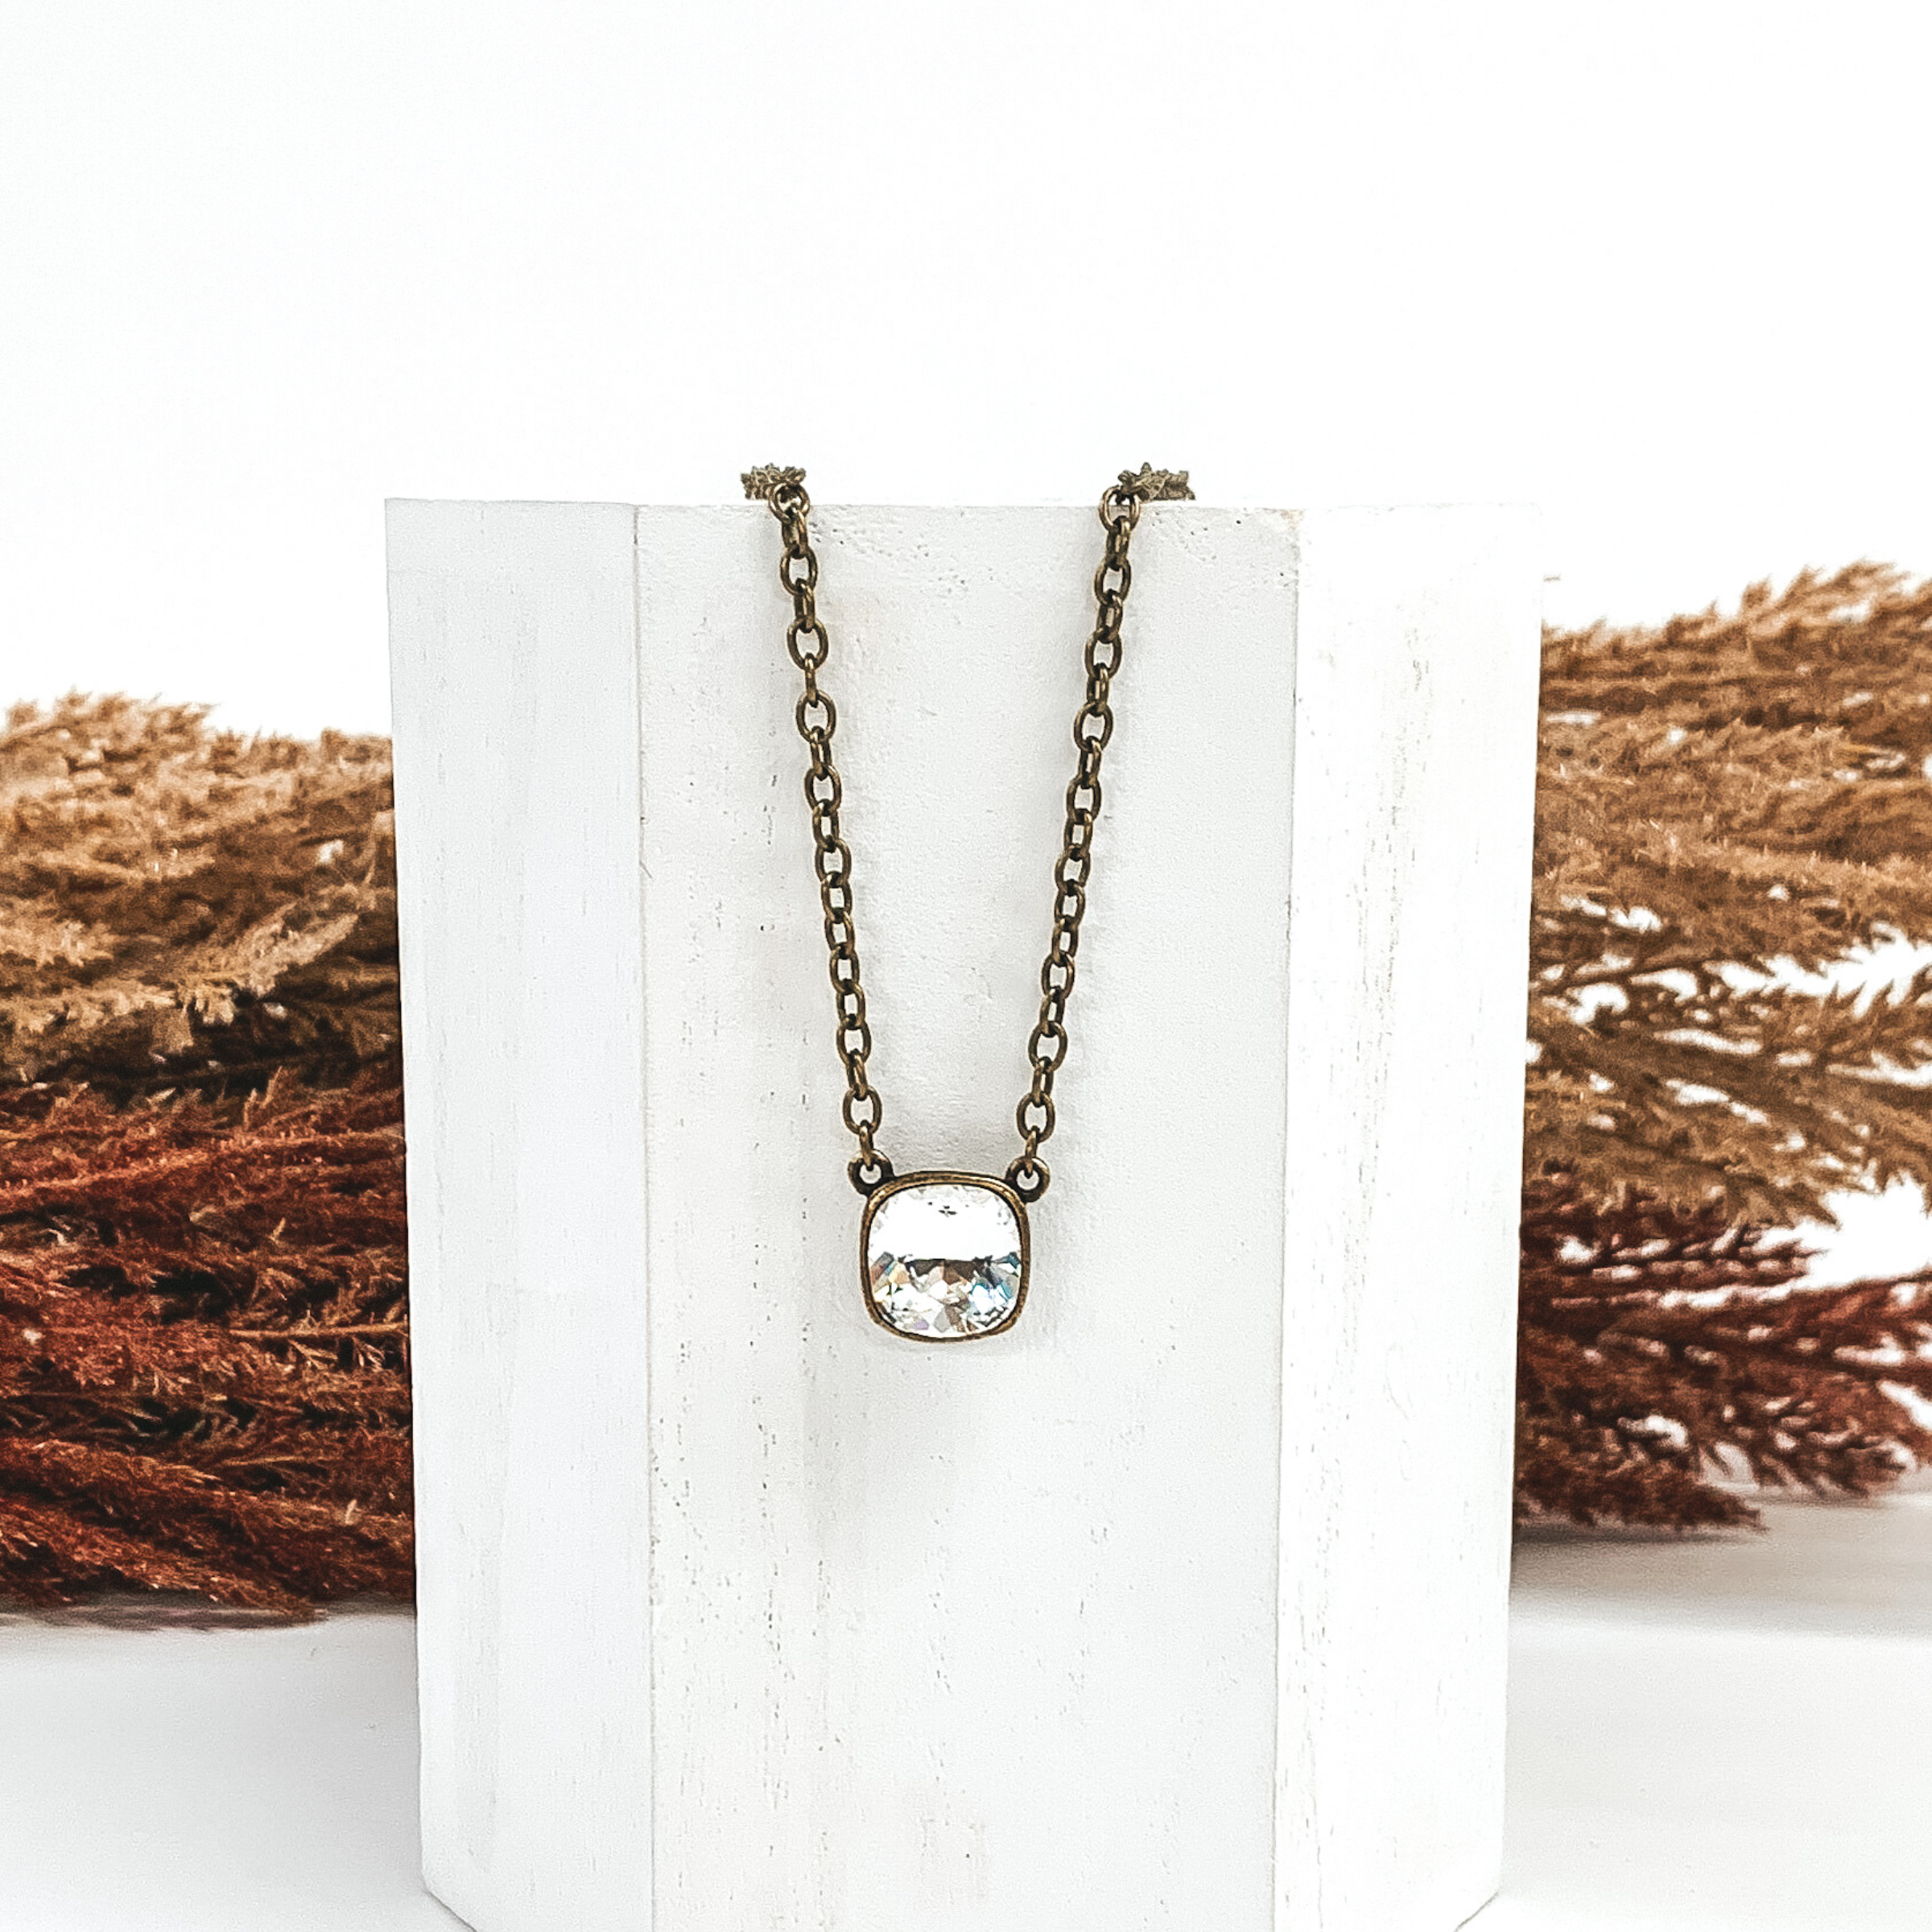 Bronzechained necklace with a square clear crystal pendant. The necklace is hanging on a white block in front of brown and tan decor